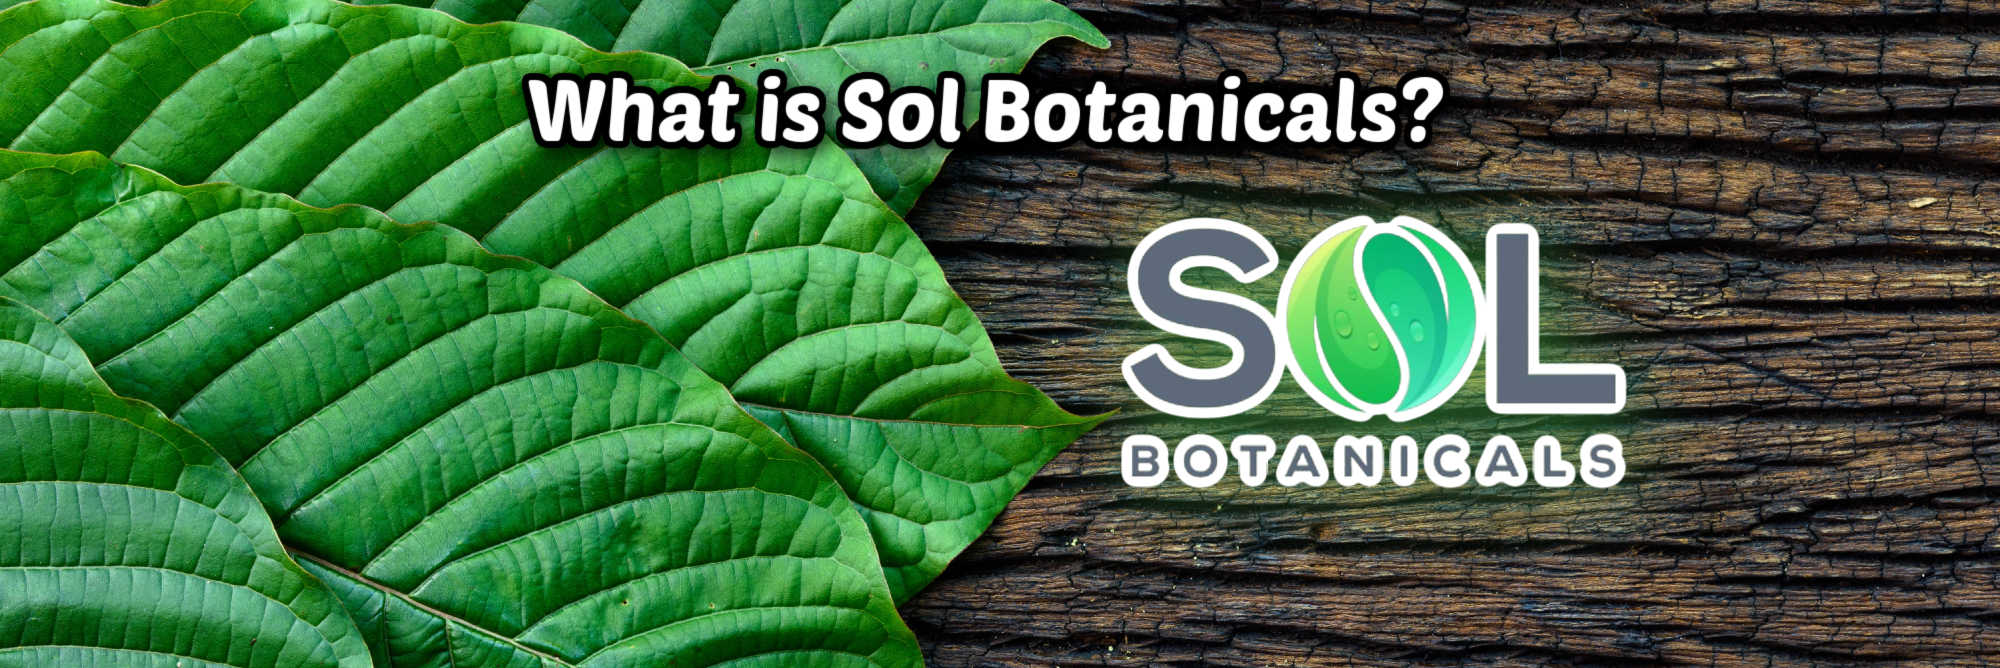 image of what is sol botanicals